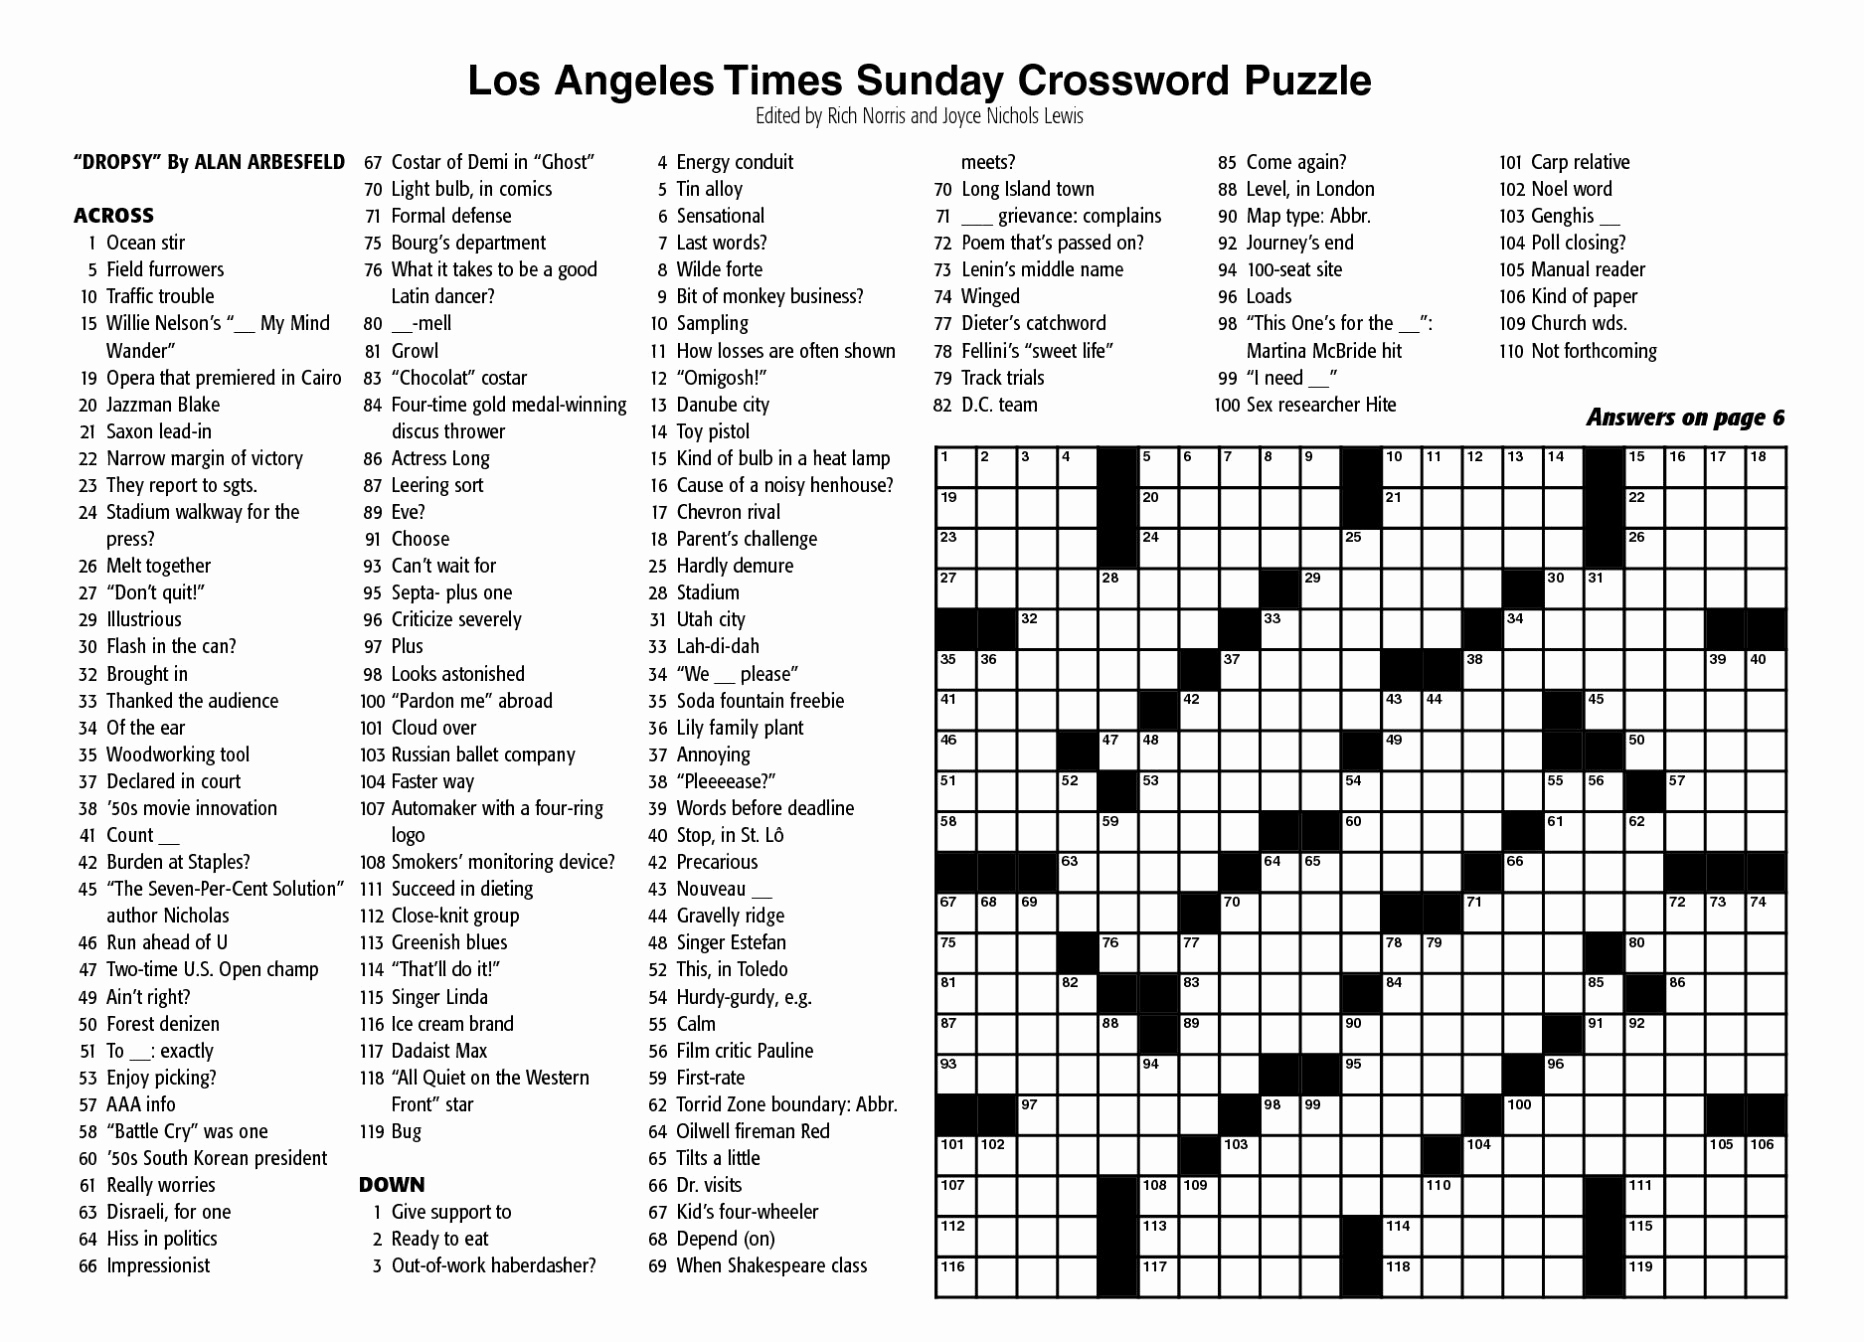 Sunday Crossword Puzzle Printable Ny Times Syndicated Answers Free La Times Sunday Crossword Puzzle Printable 